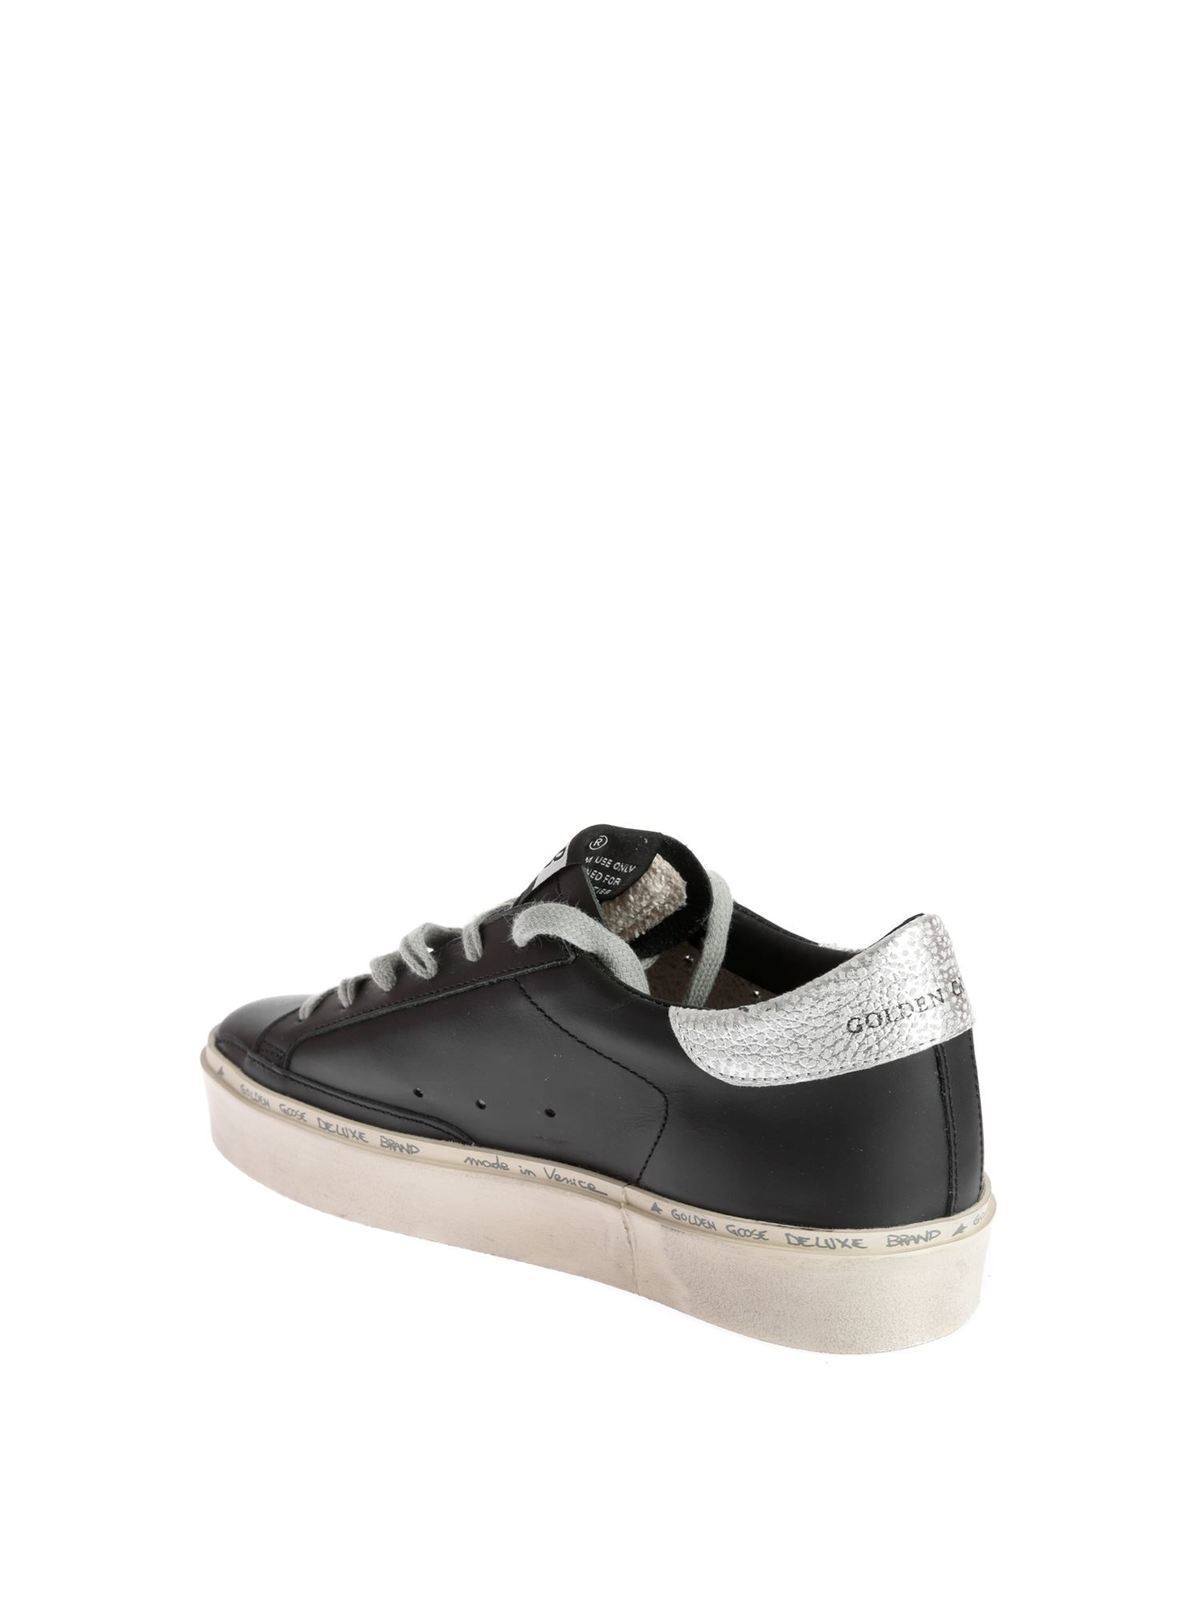 Shop Golden Goose Hi Star Sneakers In Black With Laminated Logo In Negro